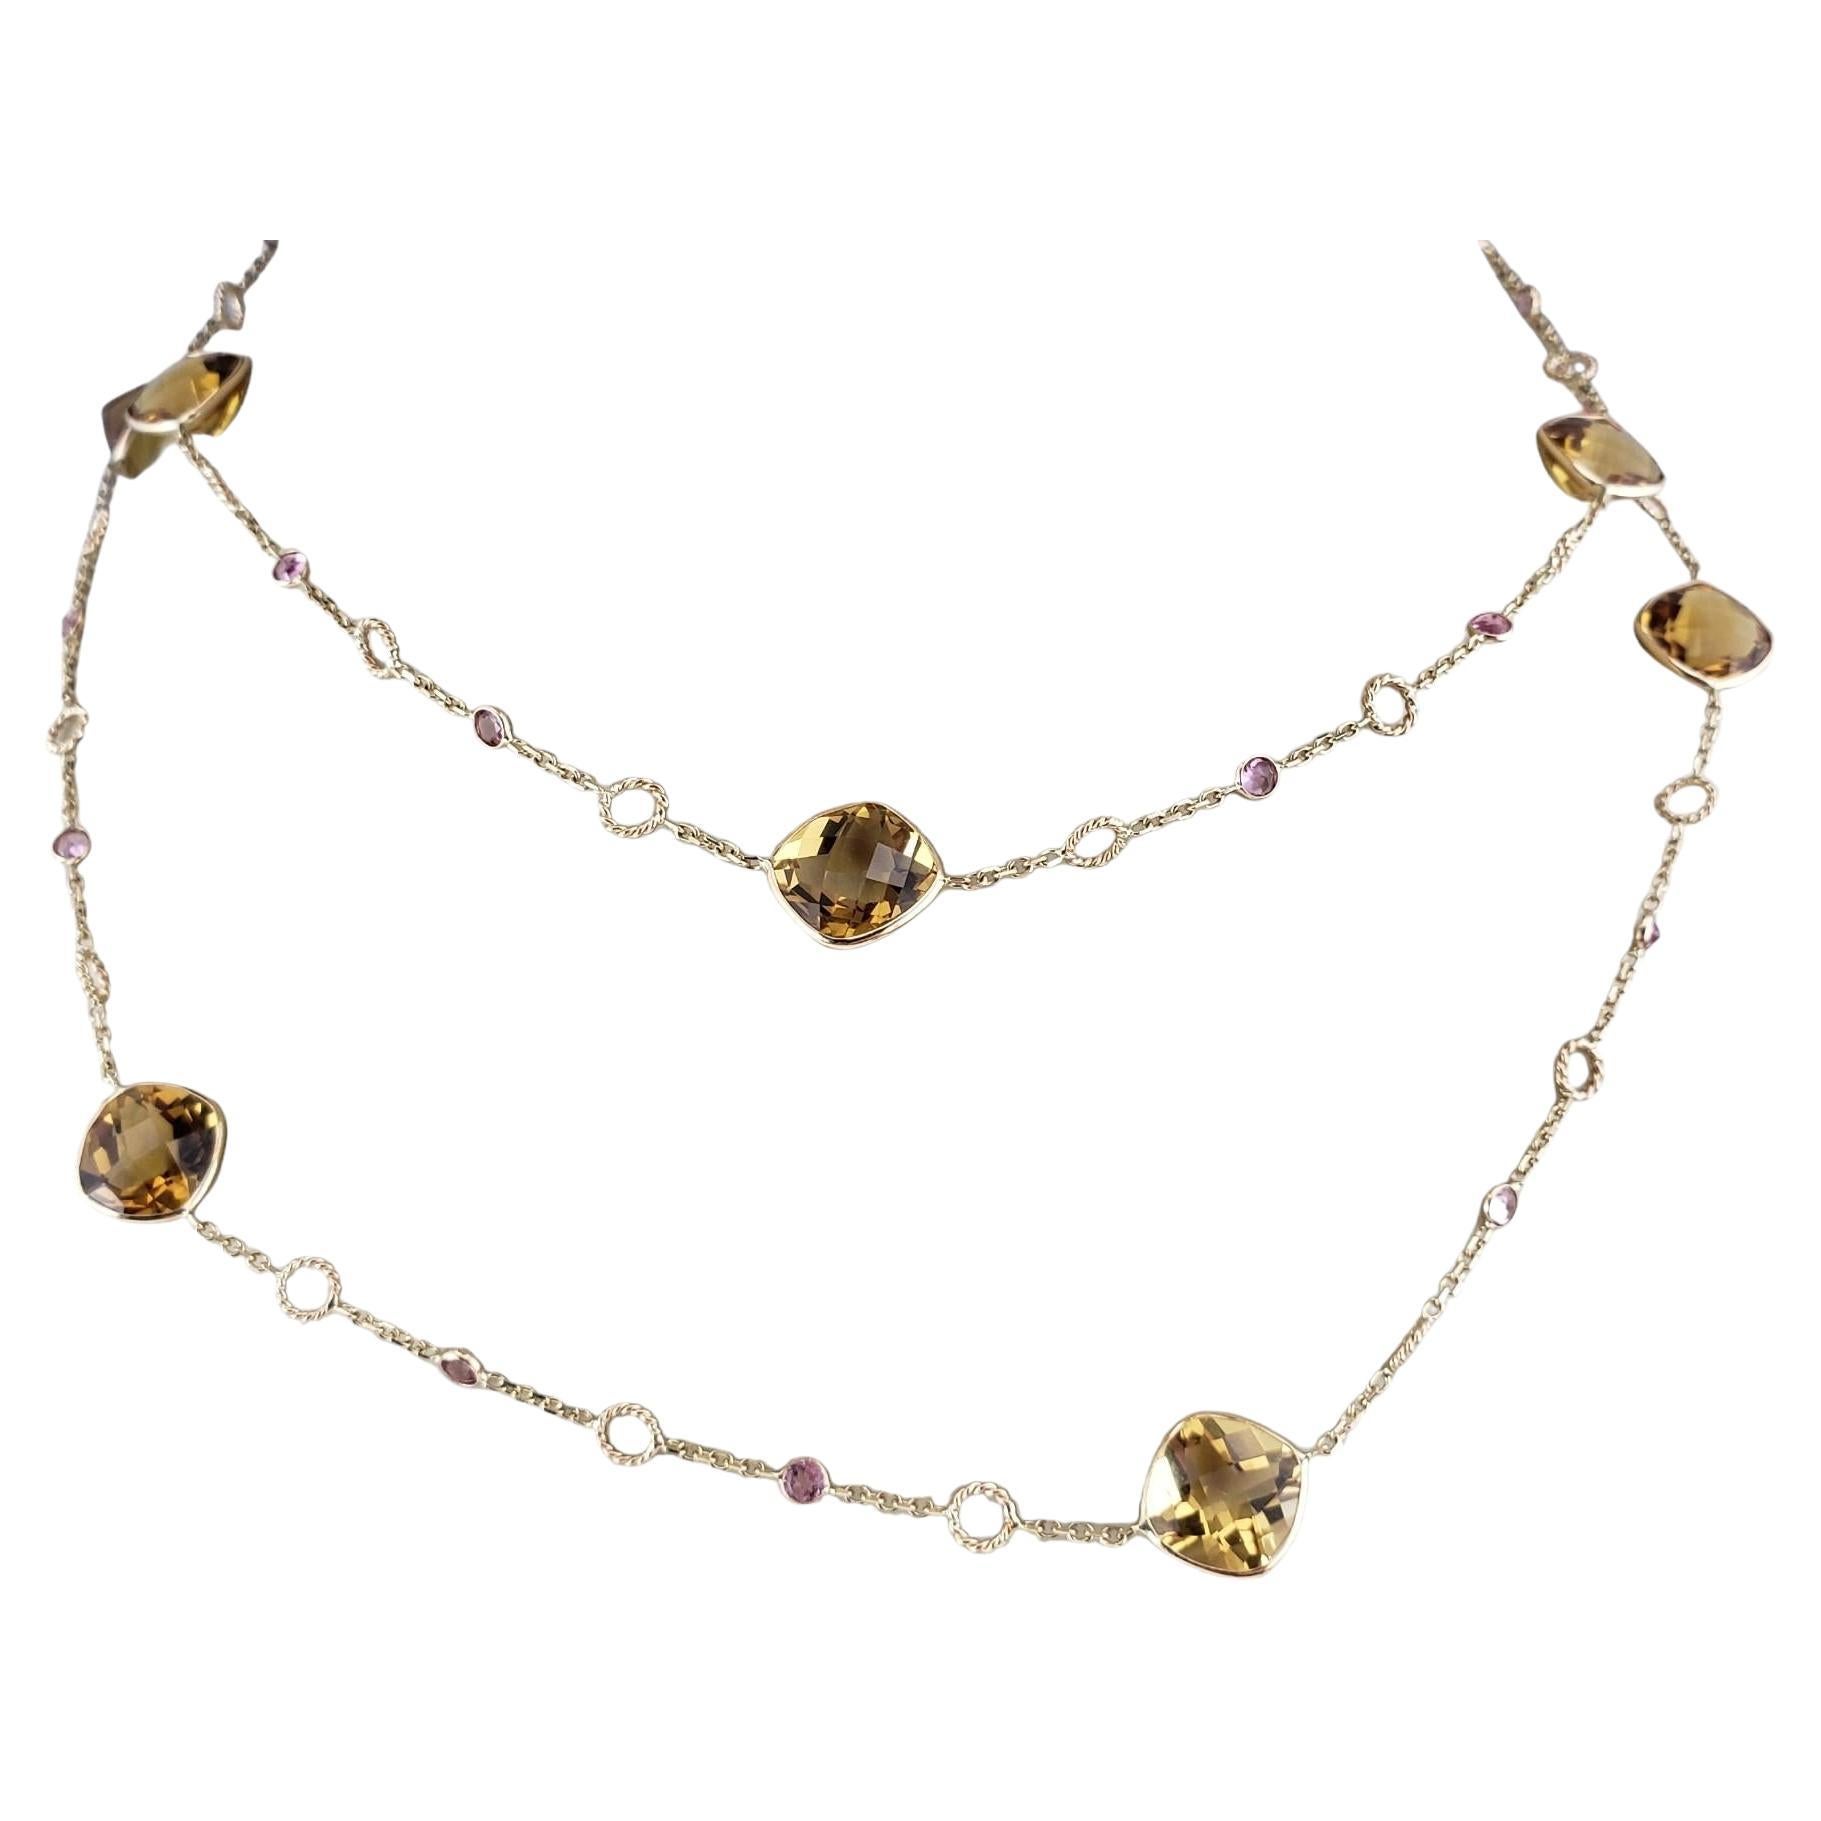 14K Yellow Gold Citrine & Pink Tourmaline Necklace 36" #17081 For Sale